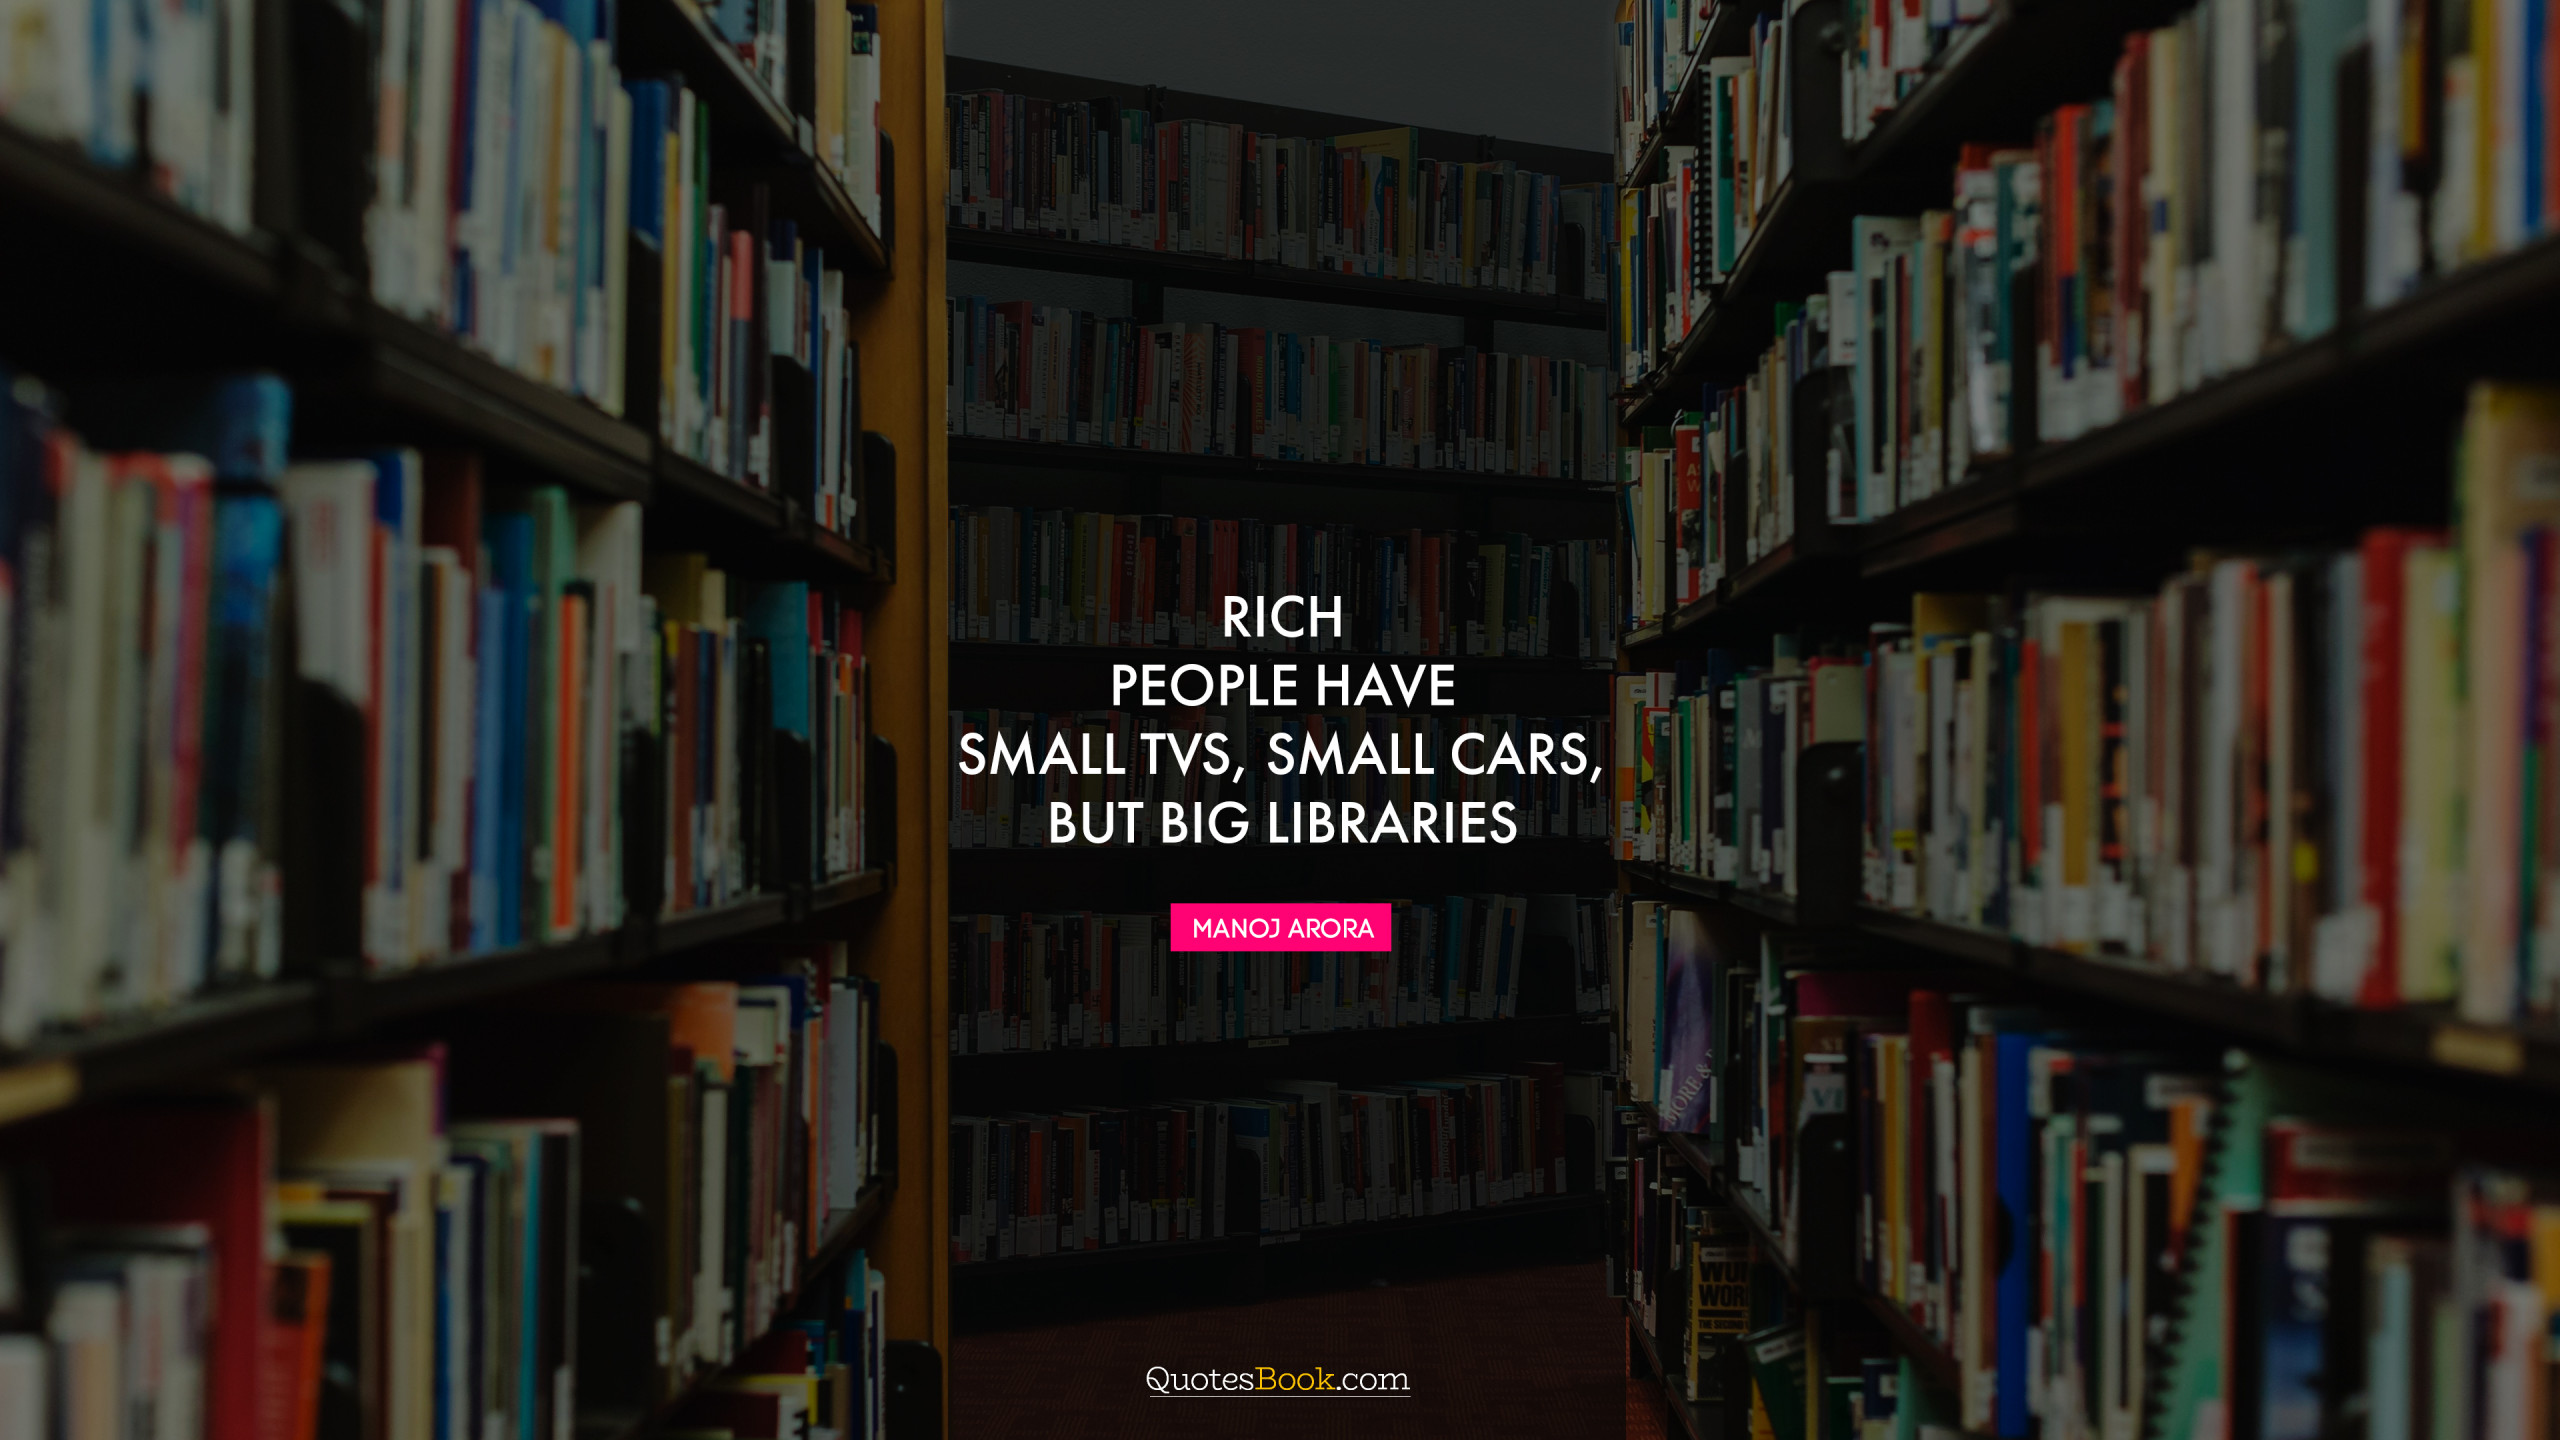 Rich people have small TVs, small cars, but big libraries. - Quote by Manoj  Arora - QuotesBook